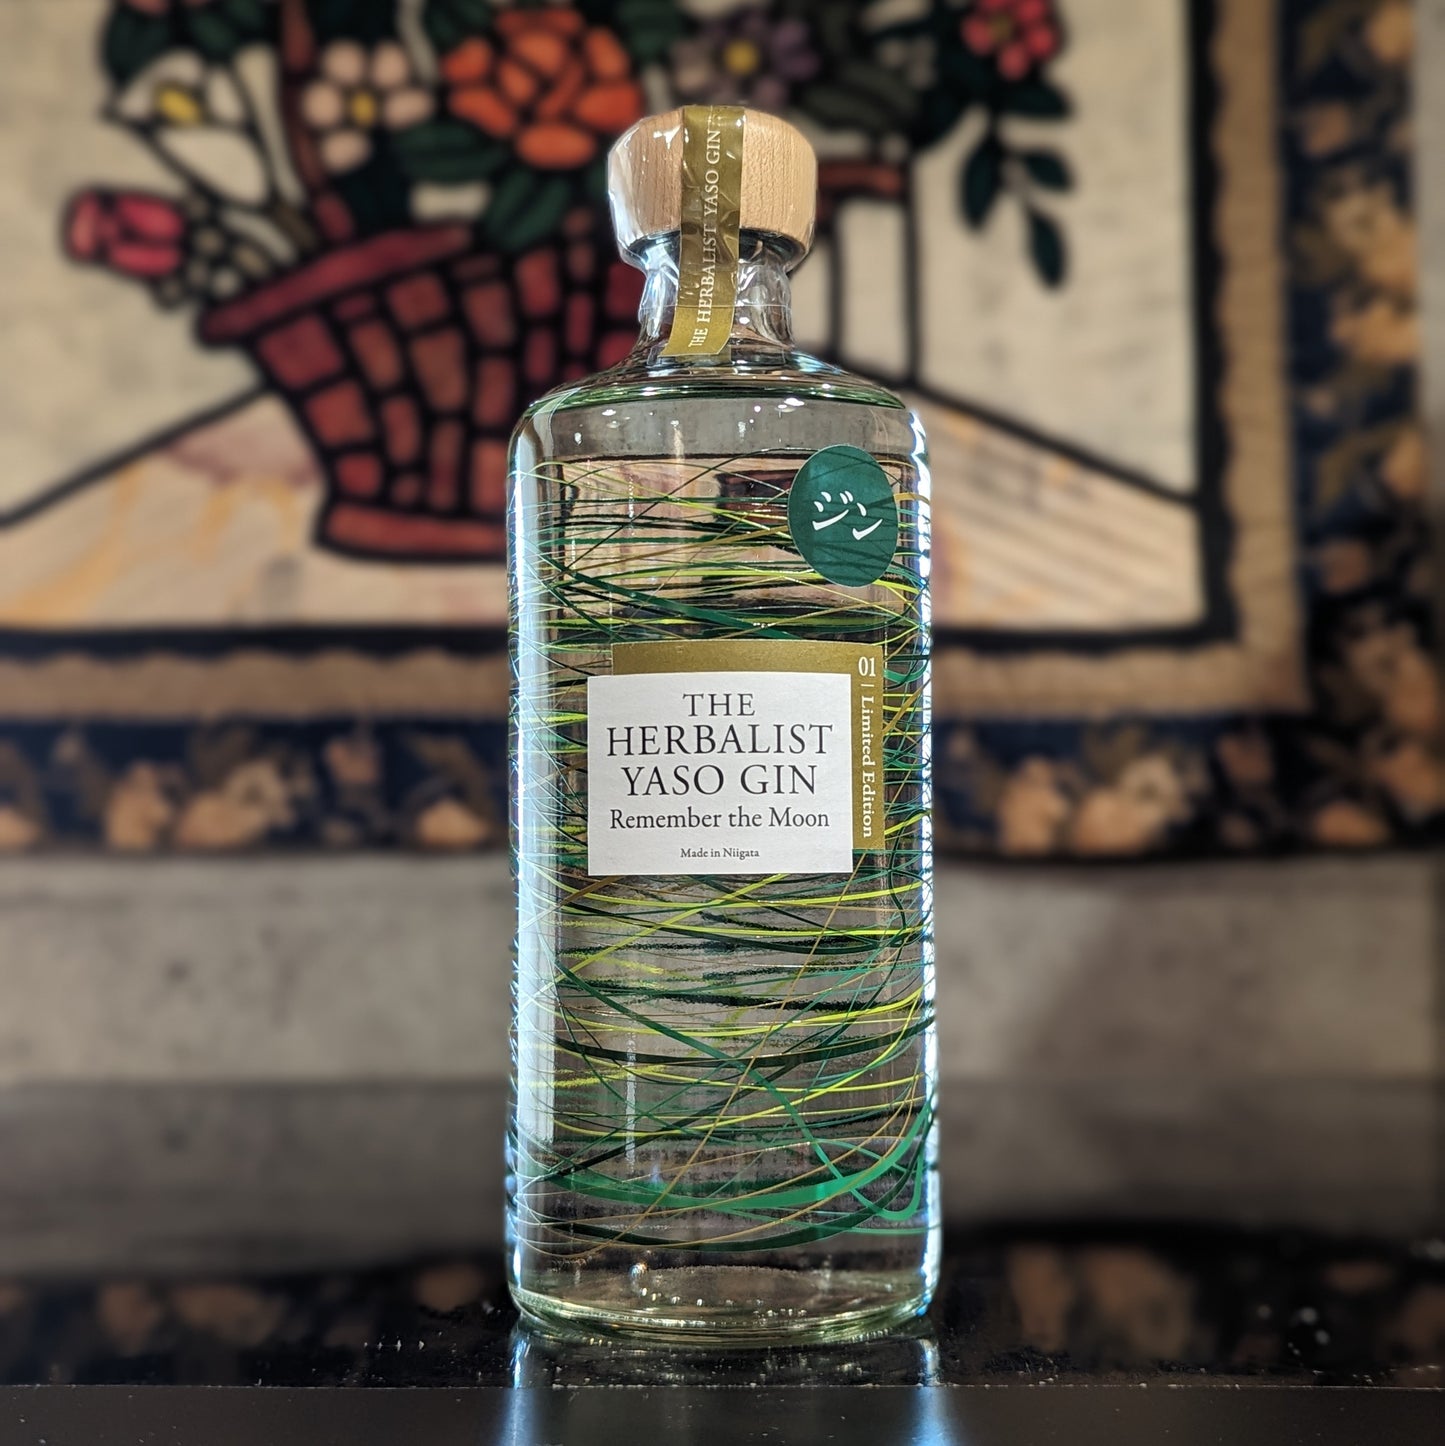 THE HERBALIST YASO GIN Limited Edition 01 Remember the Moon ／ ヤソジン リメンバー ザ ムーン